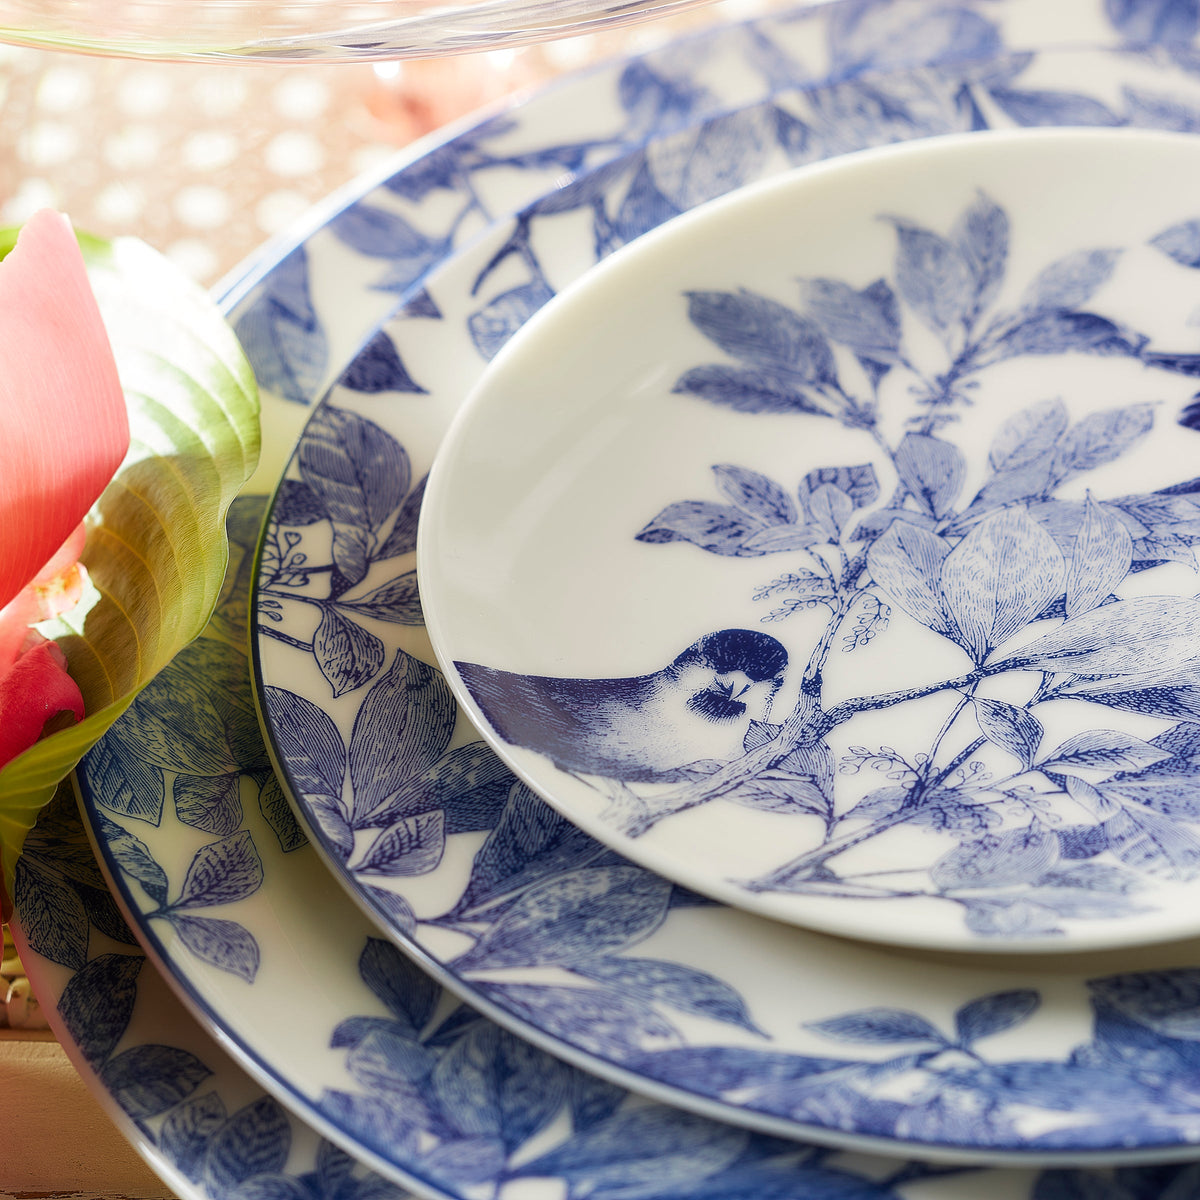 A set of white plates with blue floral and bird designs stacked on a table. The top plate, the Arbor Rimmed Charger Plate from Caskata Artisanal Home, crafted from bone china, features a bird perched on a branch among leaves. A pink flower and green foliage are partially visible nearby, showcasing intricate botanical details.